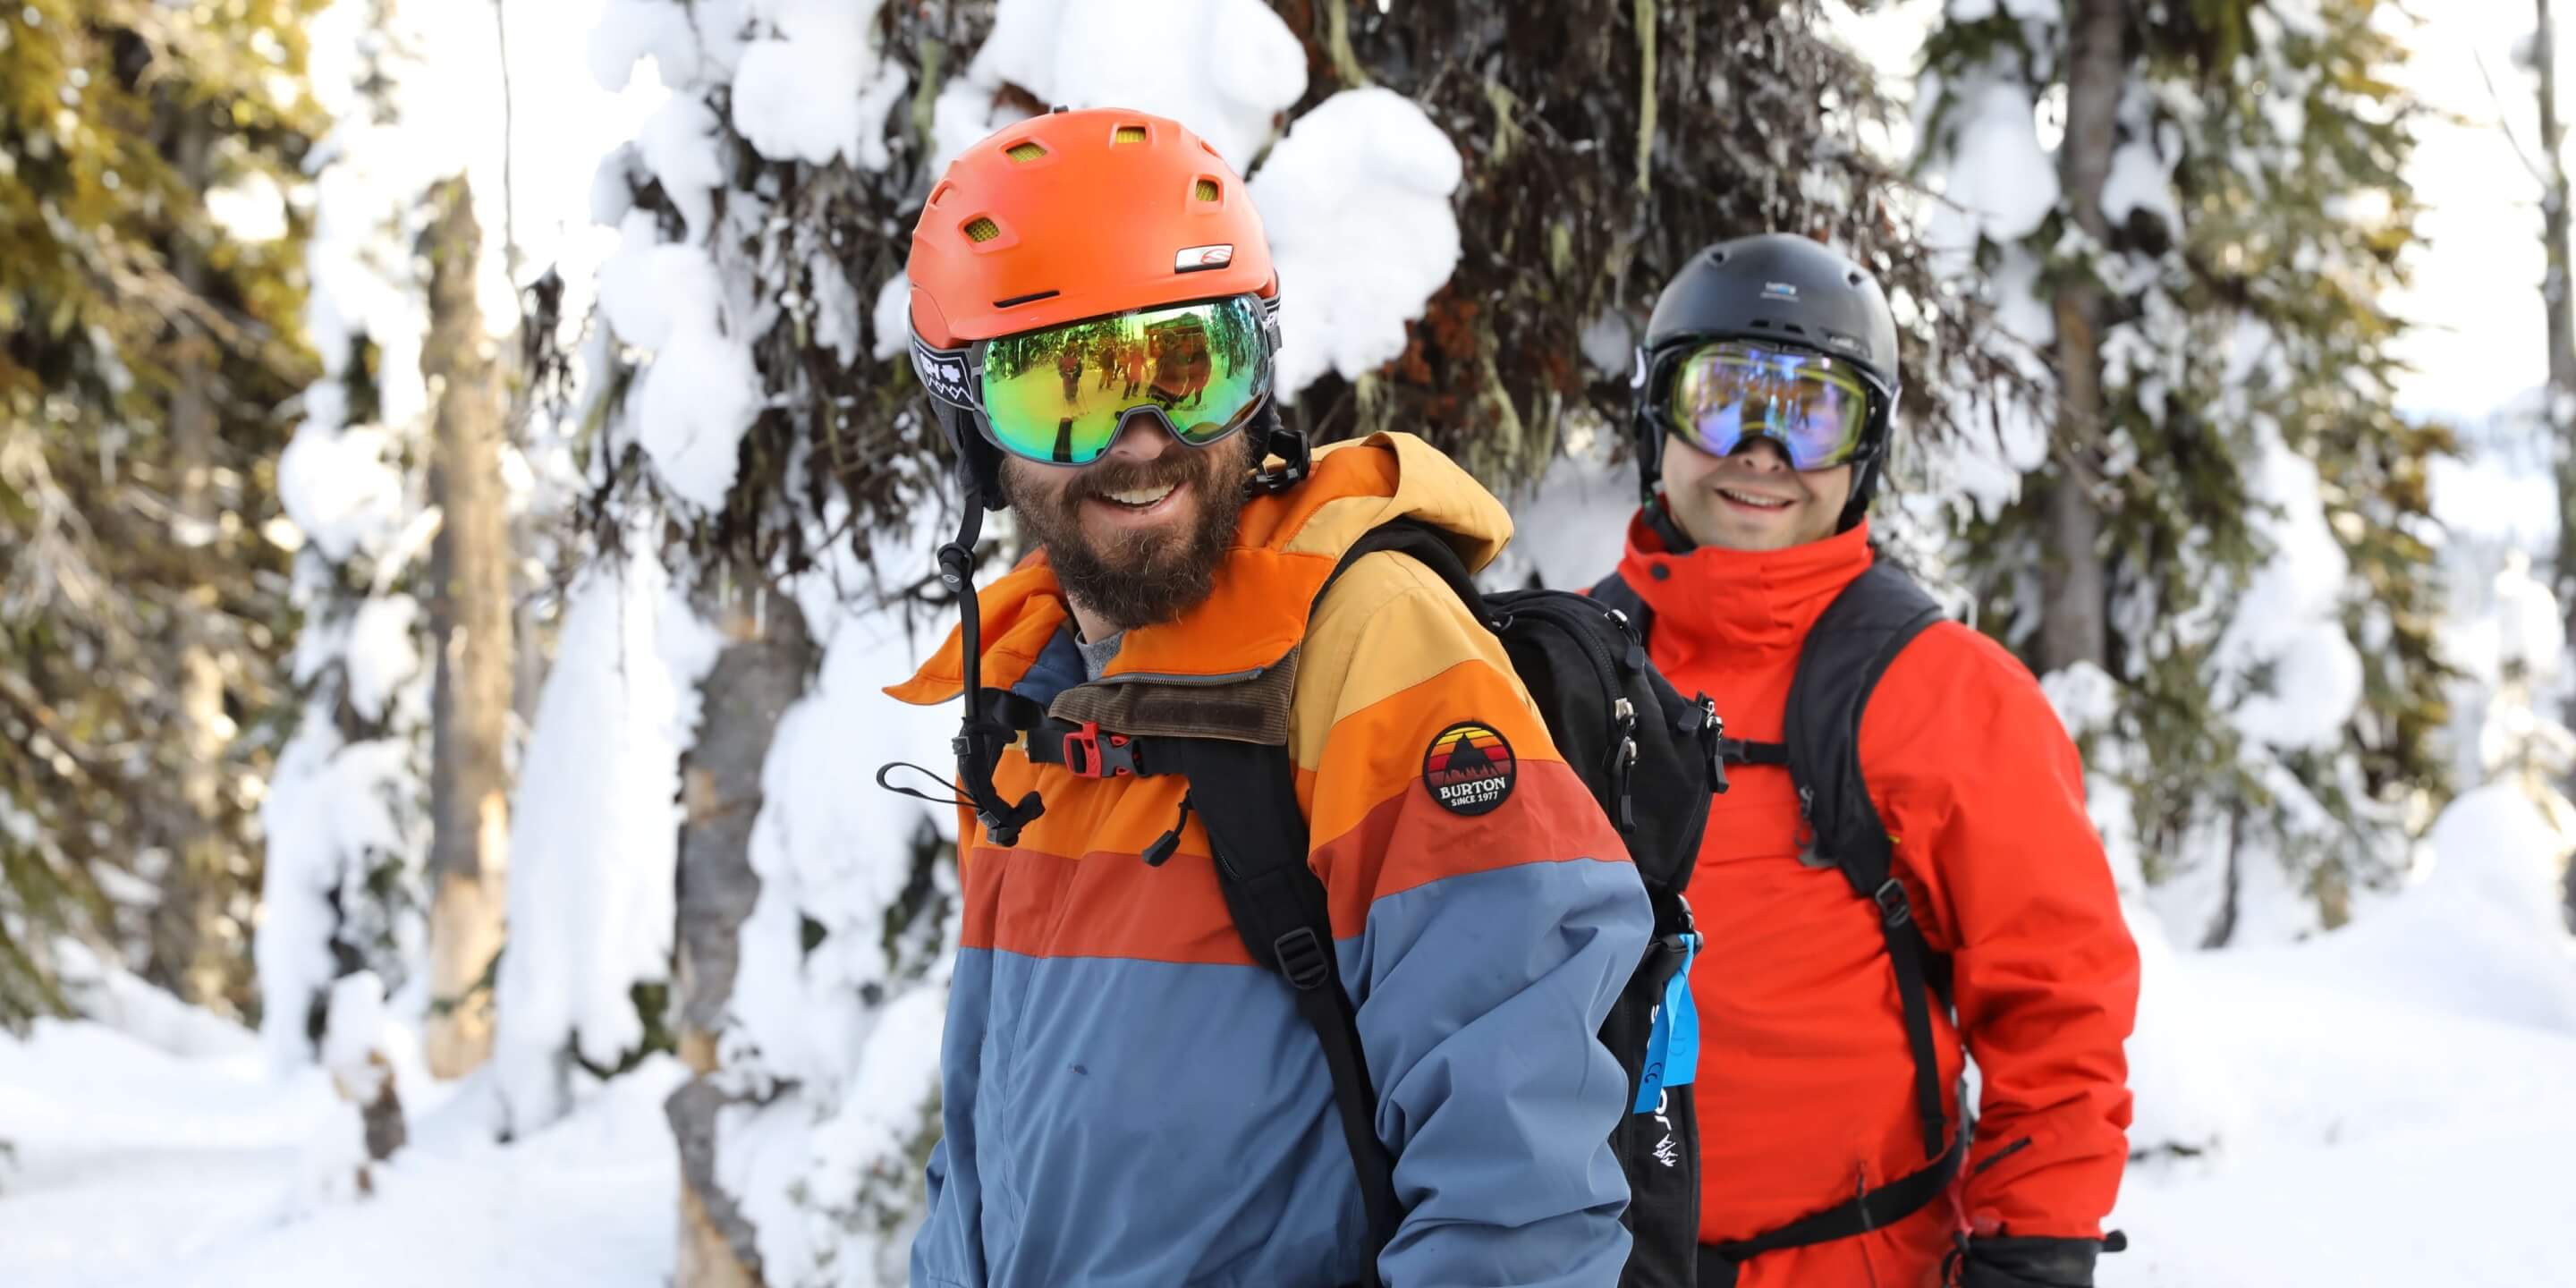 Two SaaS Academy ski retreat participants in ski and snowboard gear